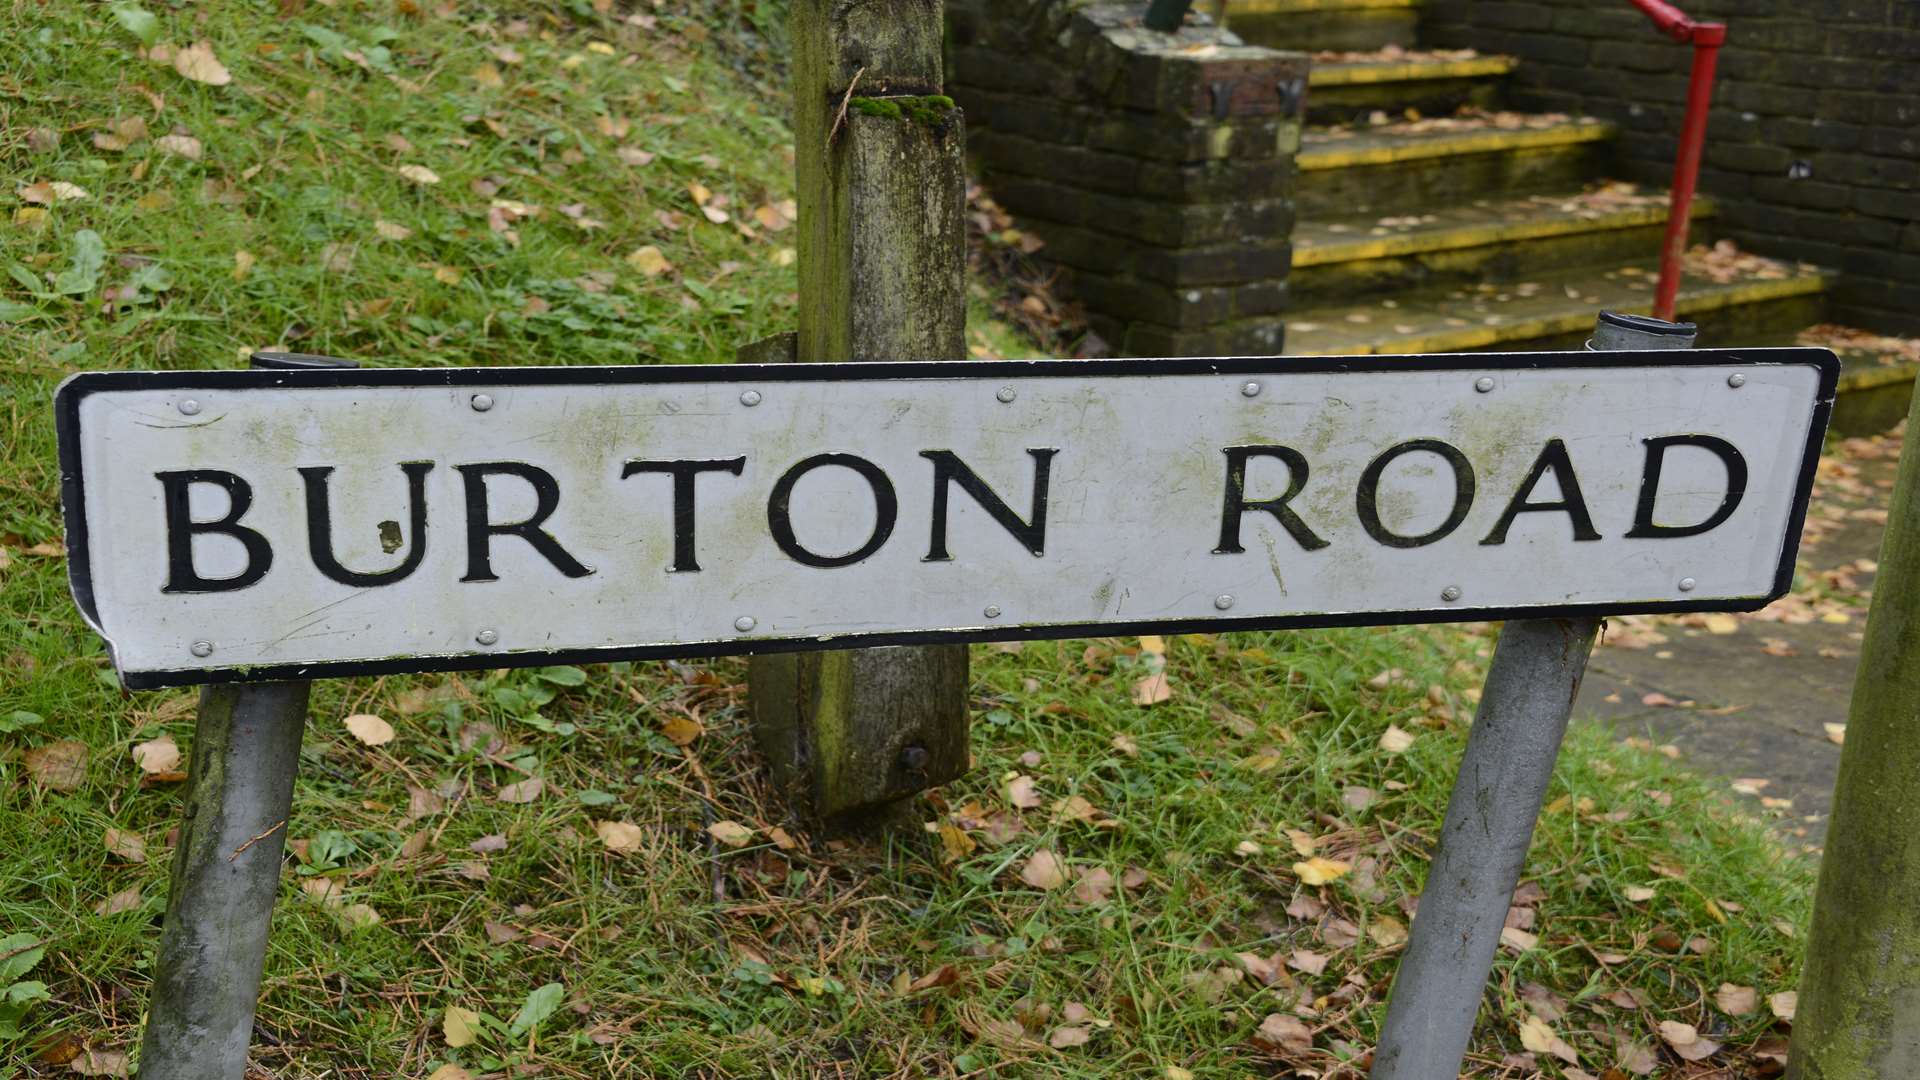 Burton Road, where the distressed girl was seen